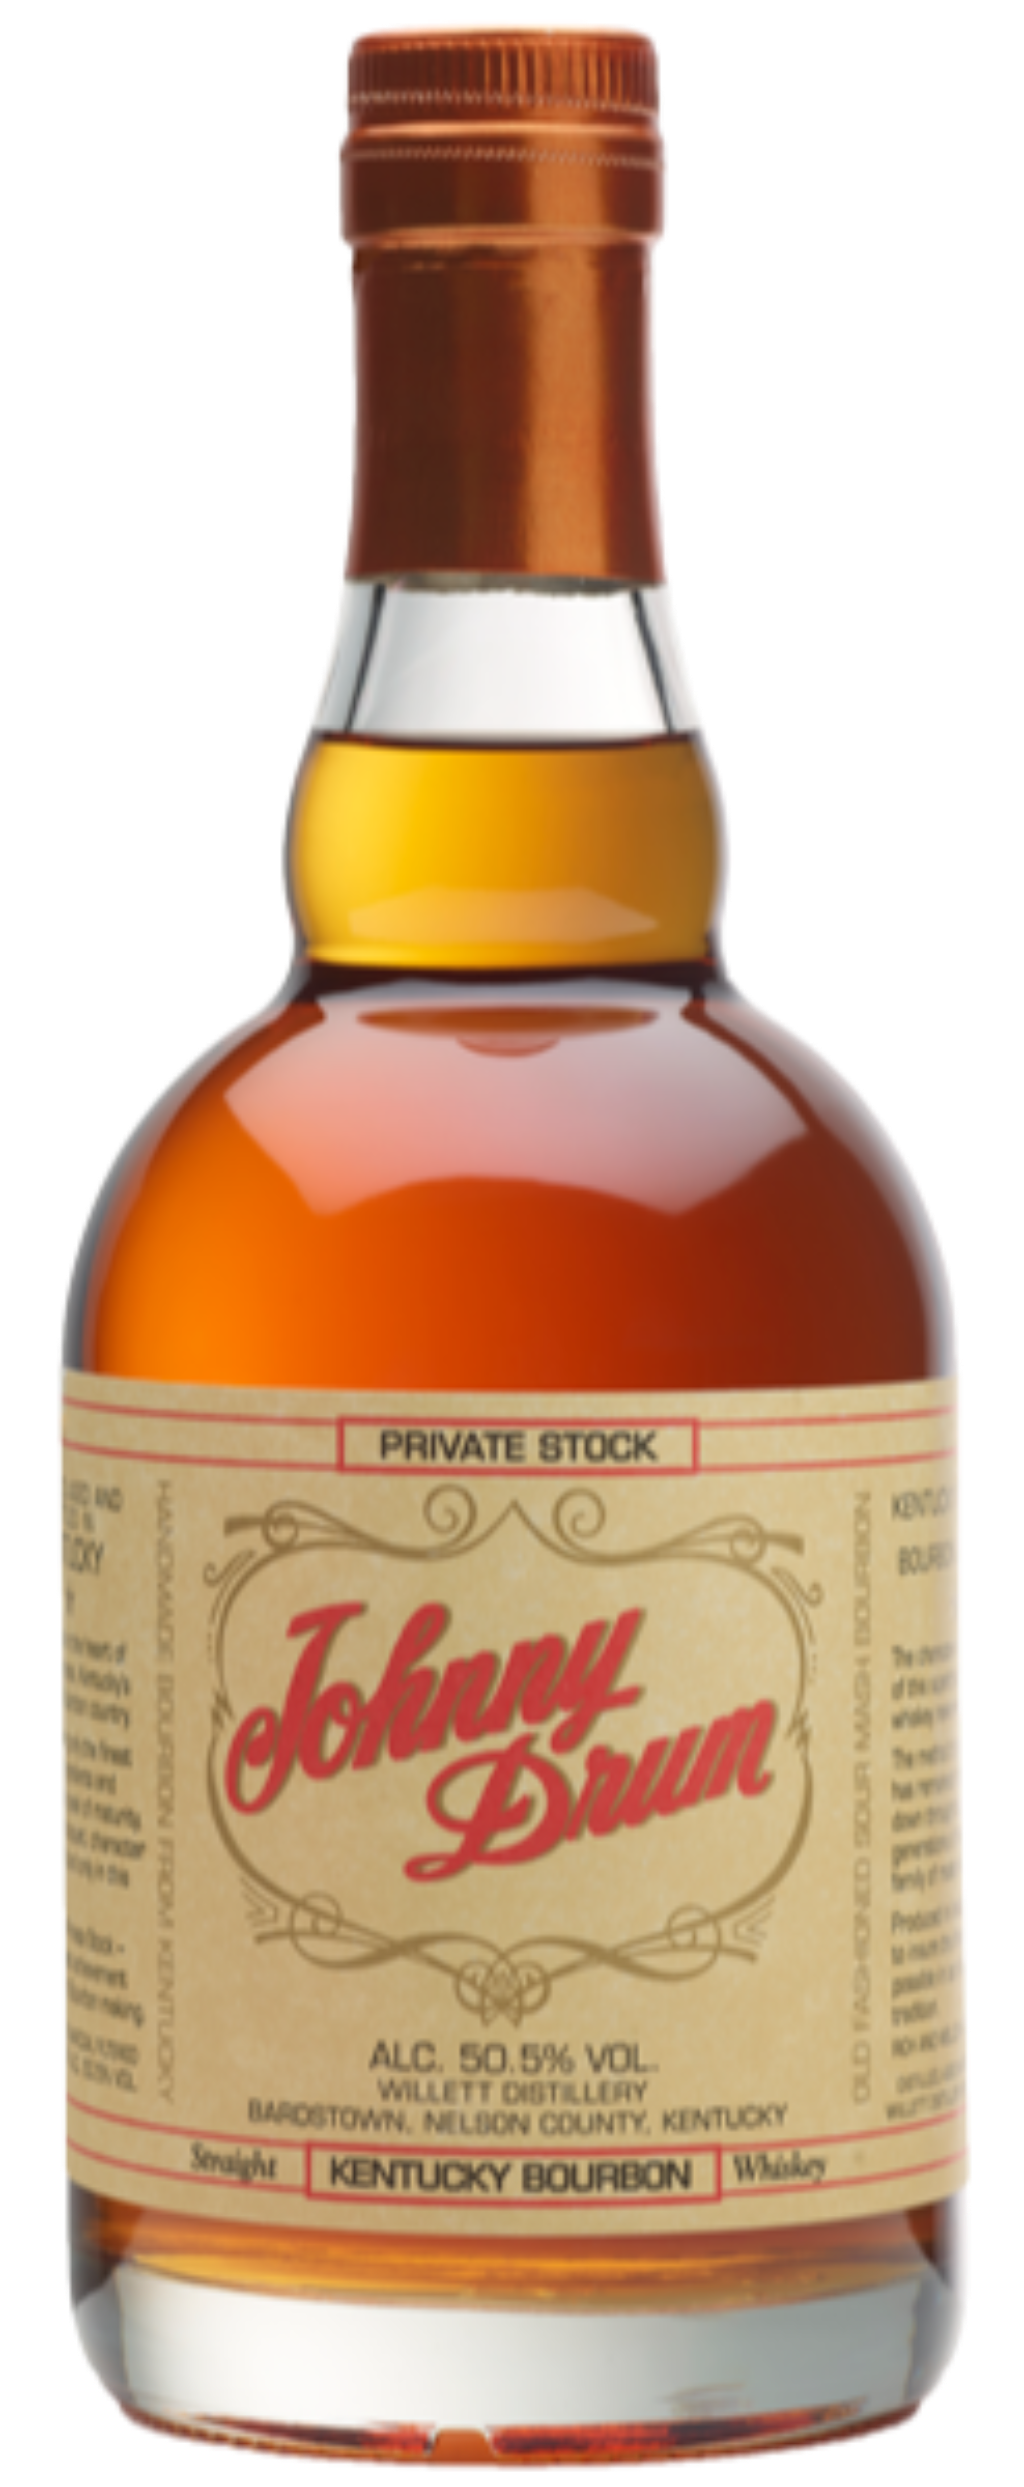 Johnny Drum Private Stock Bourbon American Whiskey